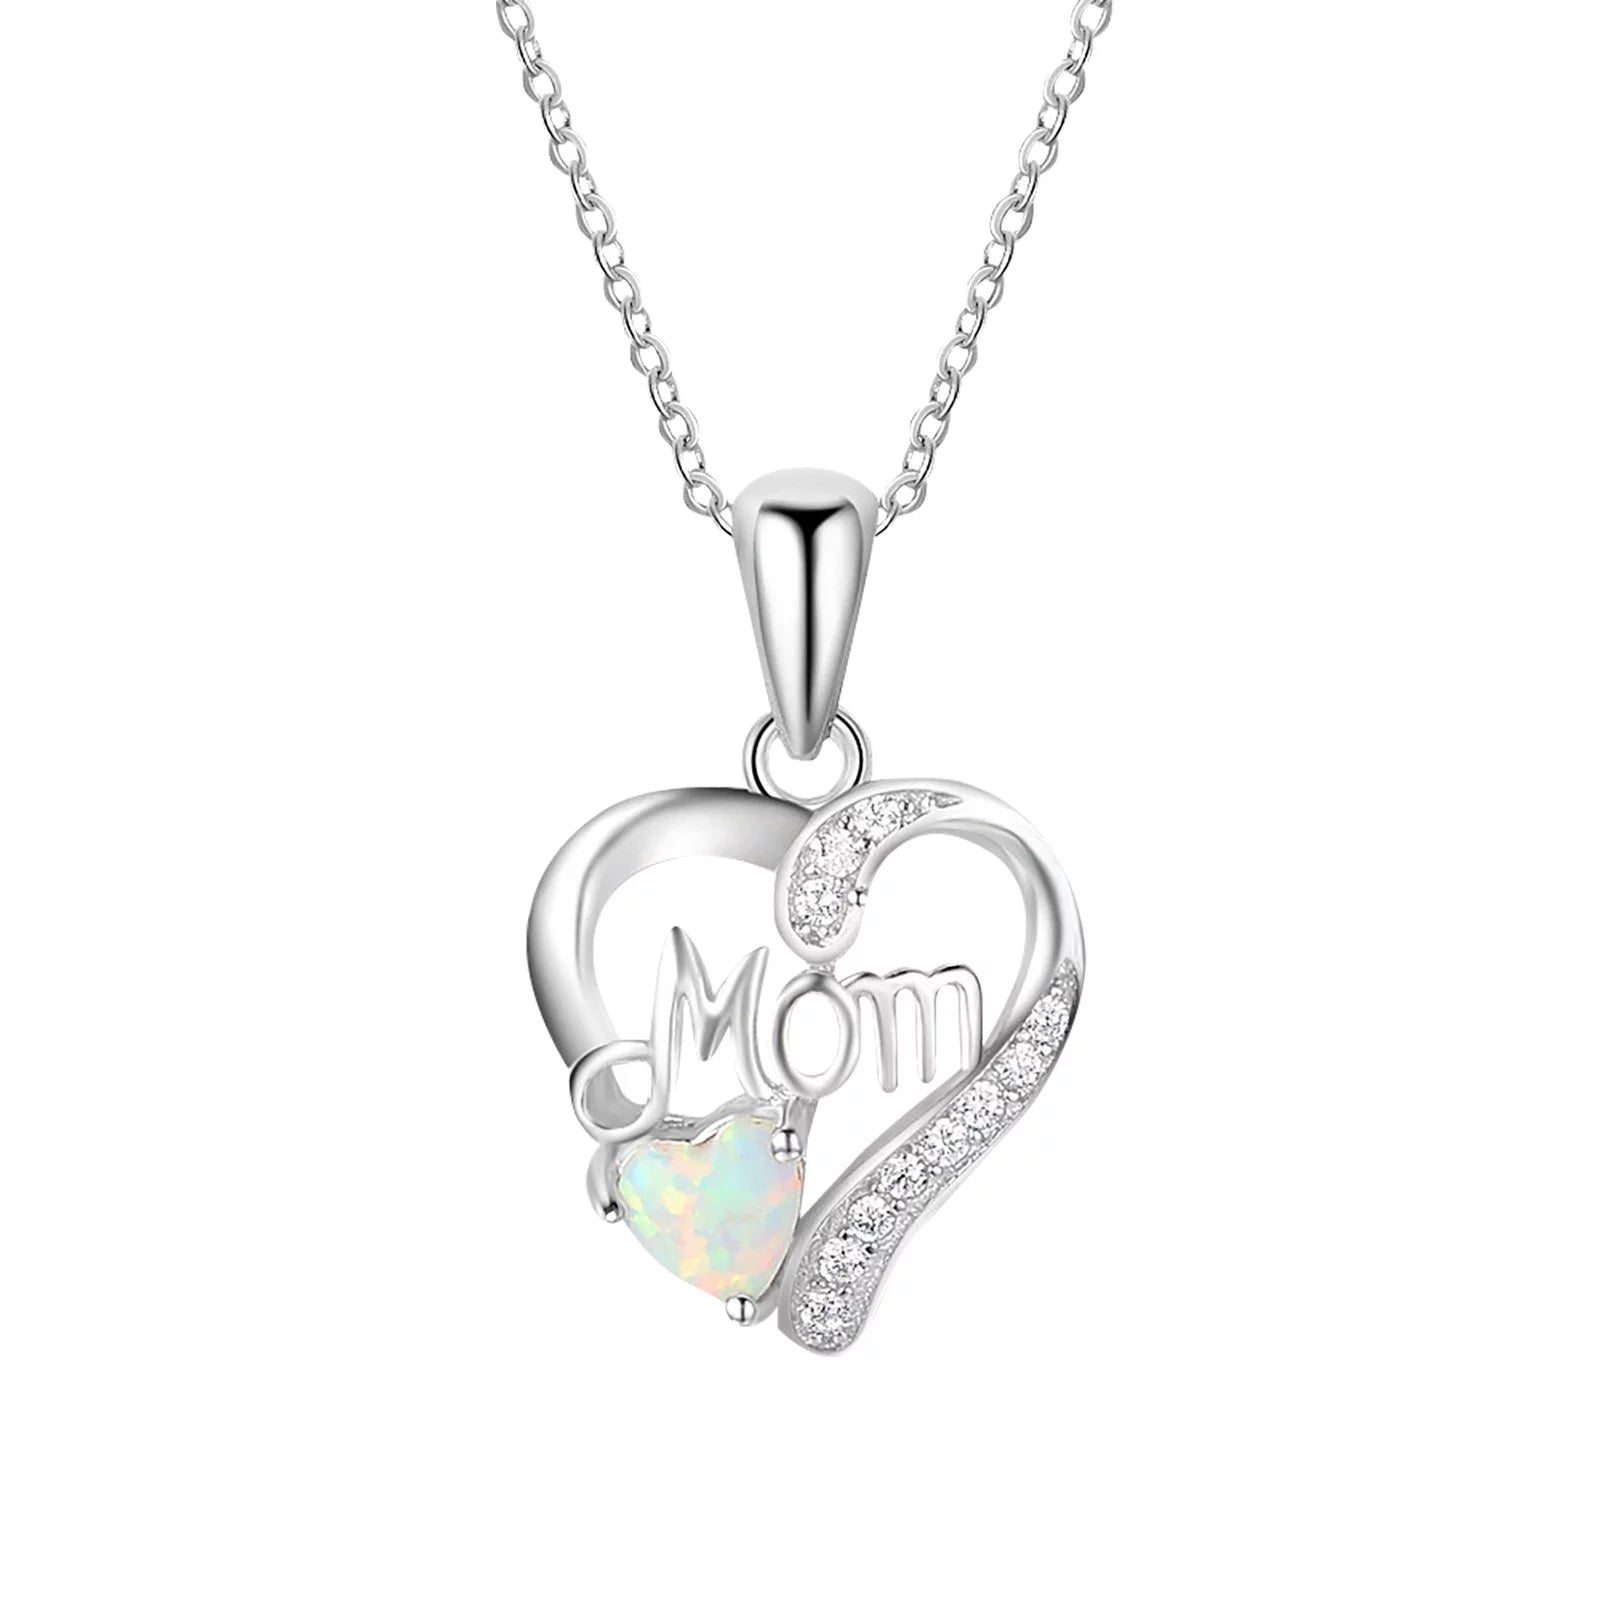 Mom - My Mom Forever - Opal 925 Sterling Silver Necklace